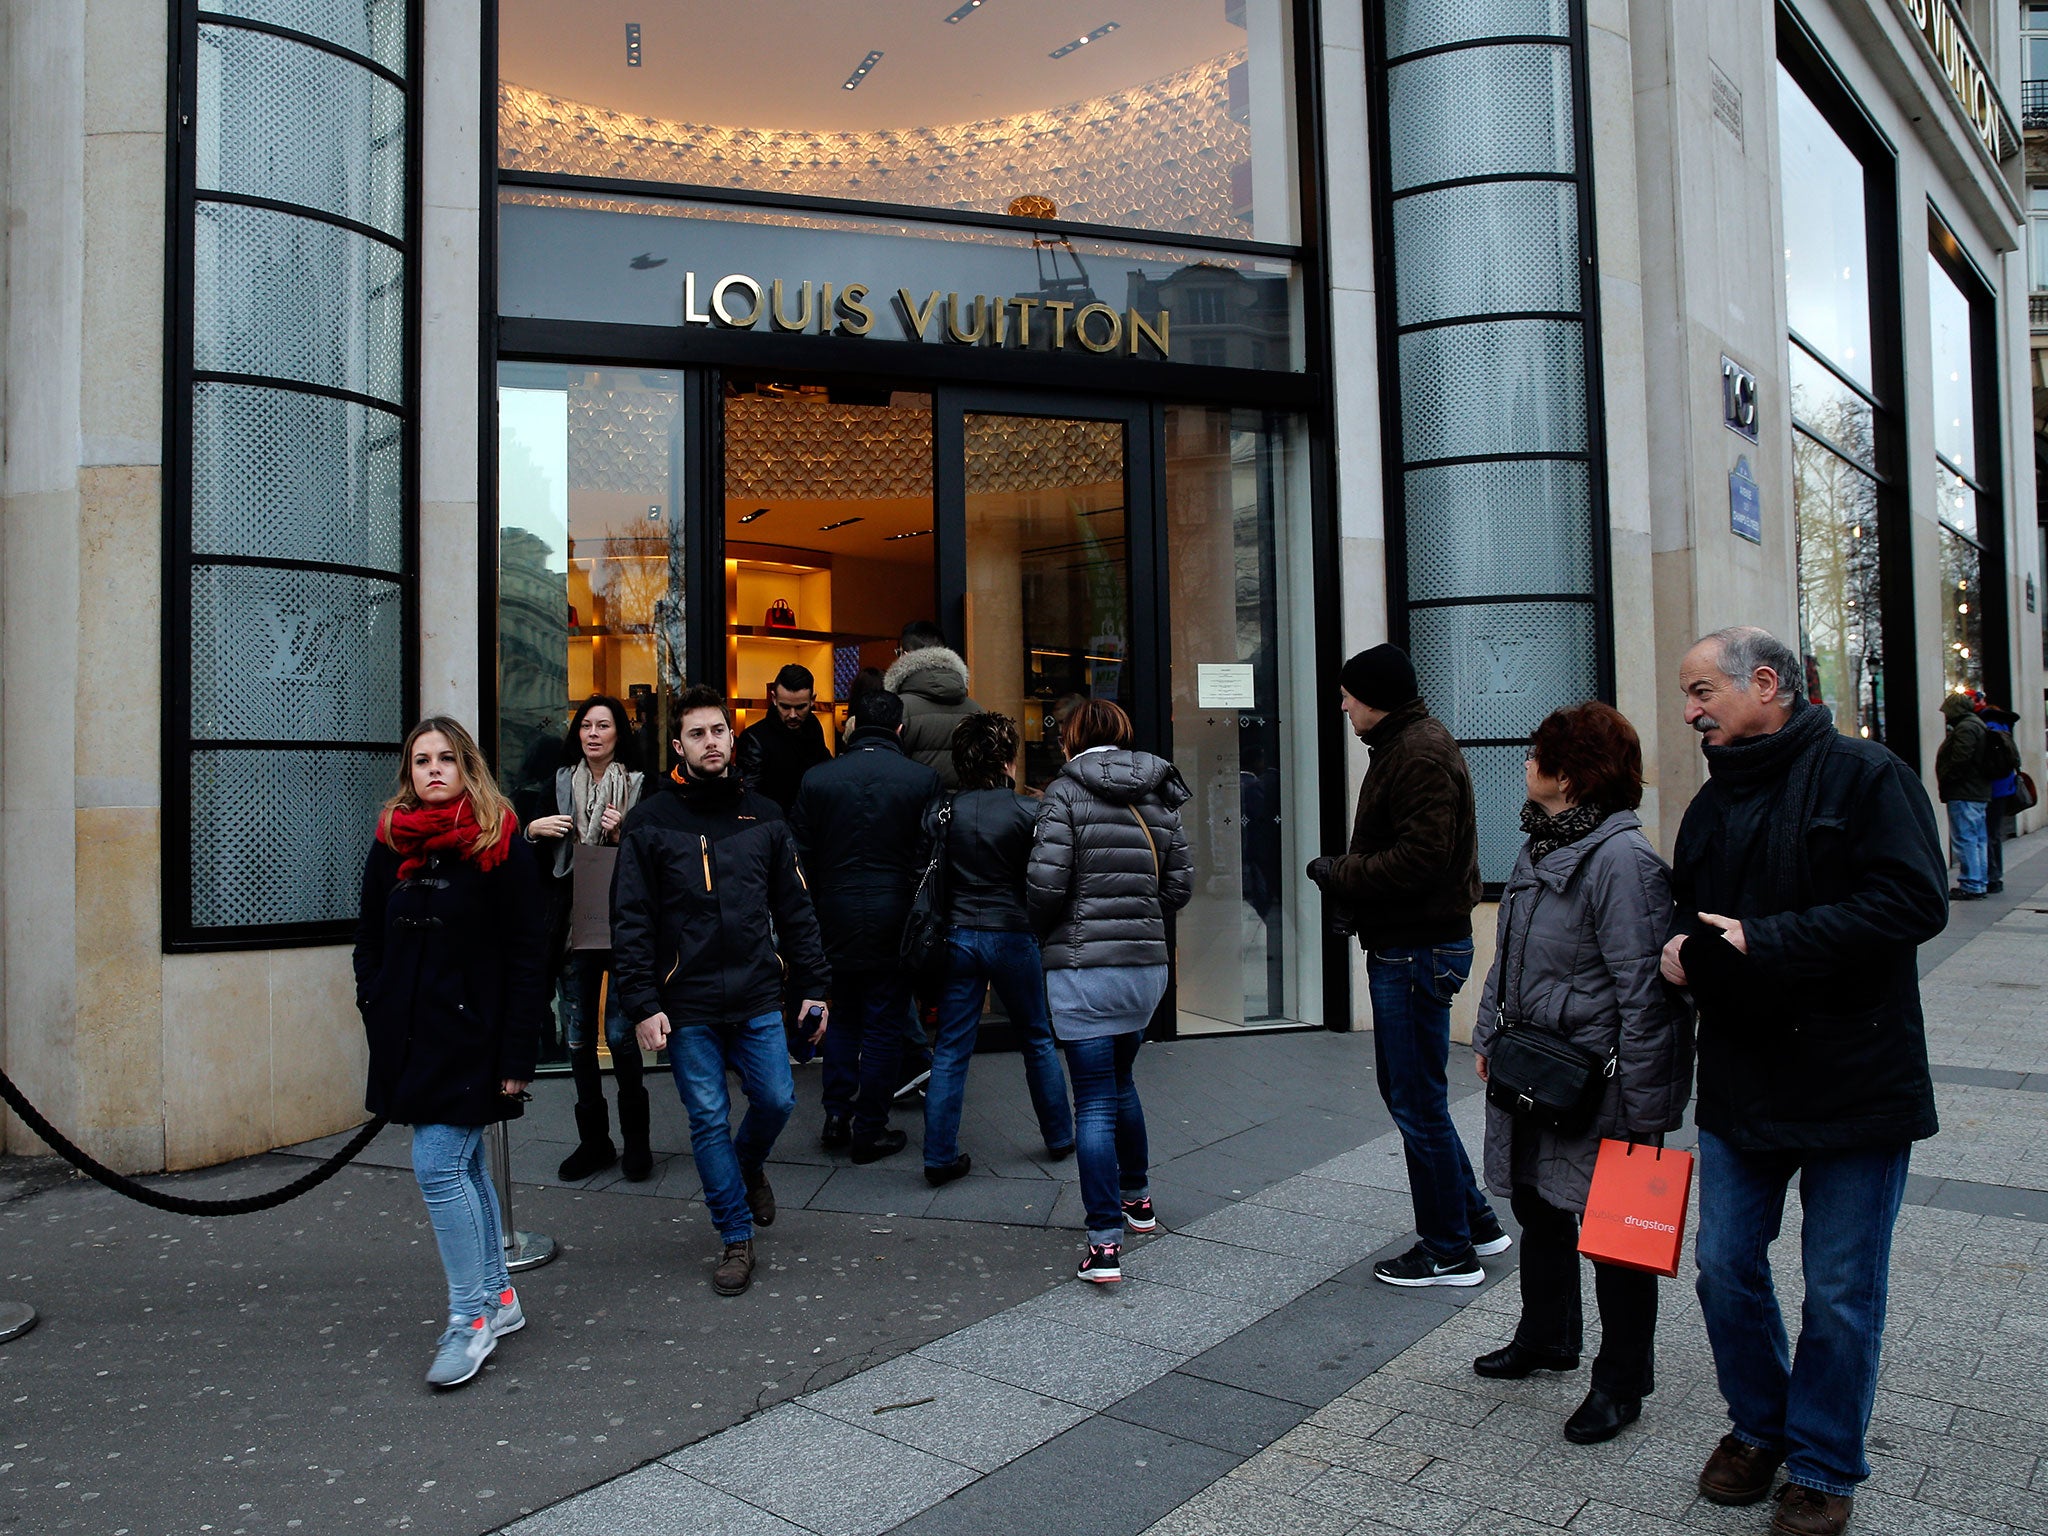 Louis Vuitton Reopens On The Champs-Elysees (NY Times)